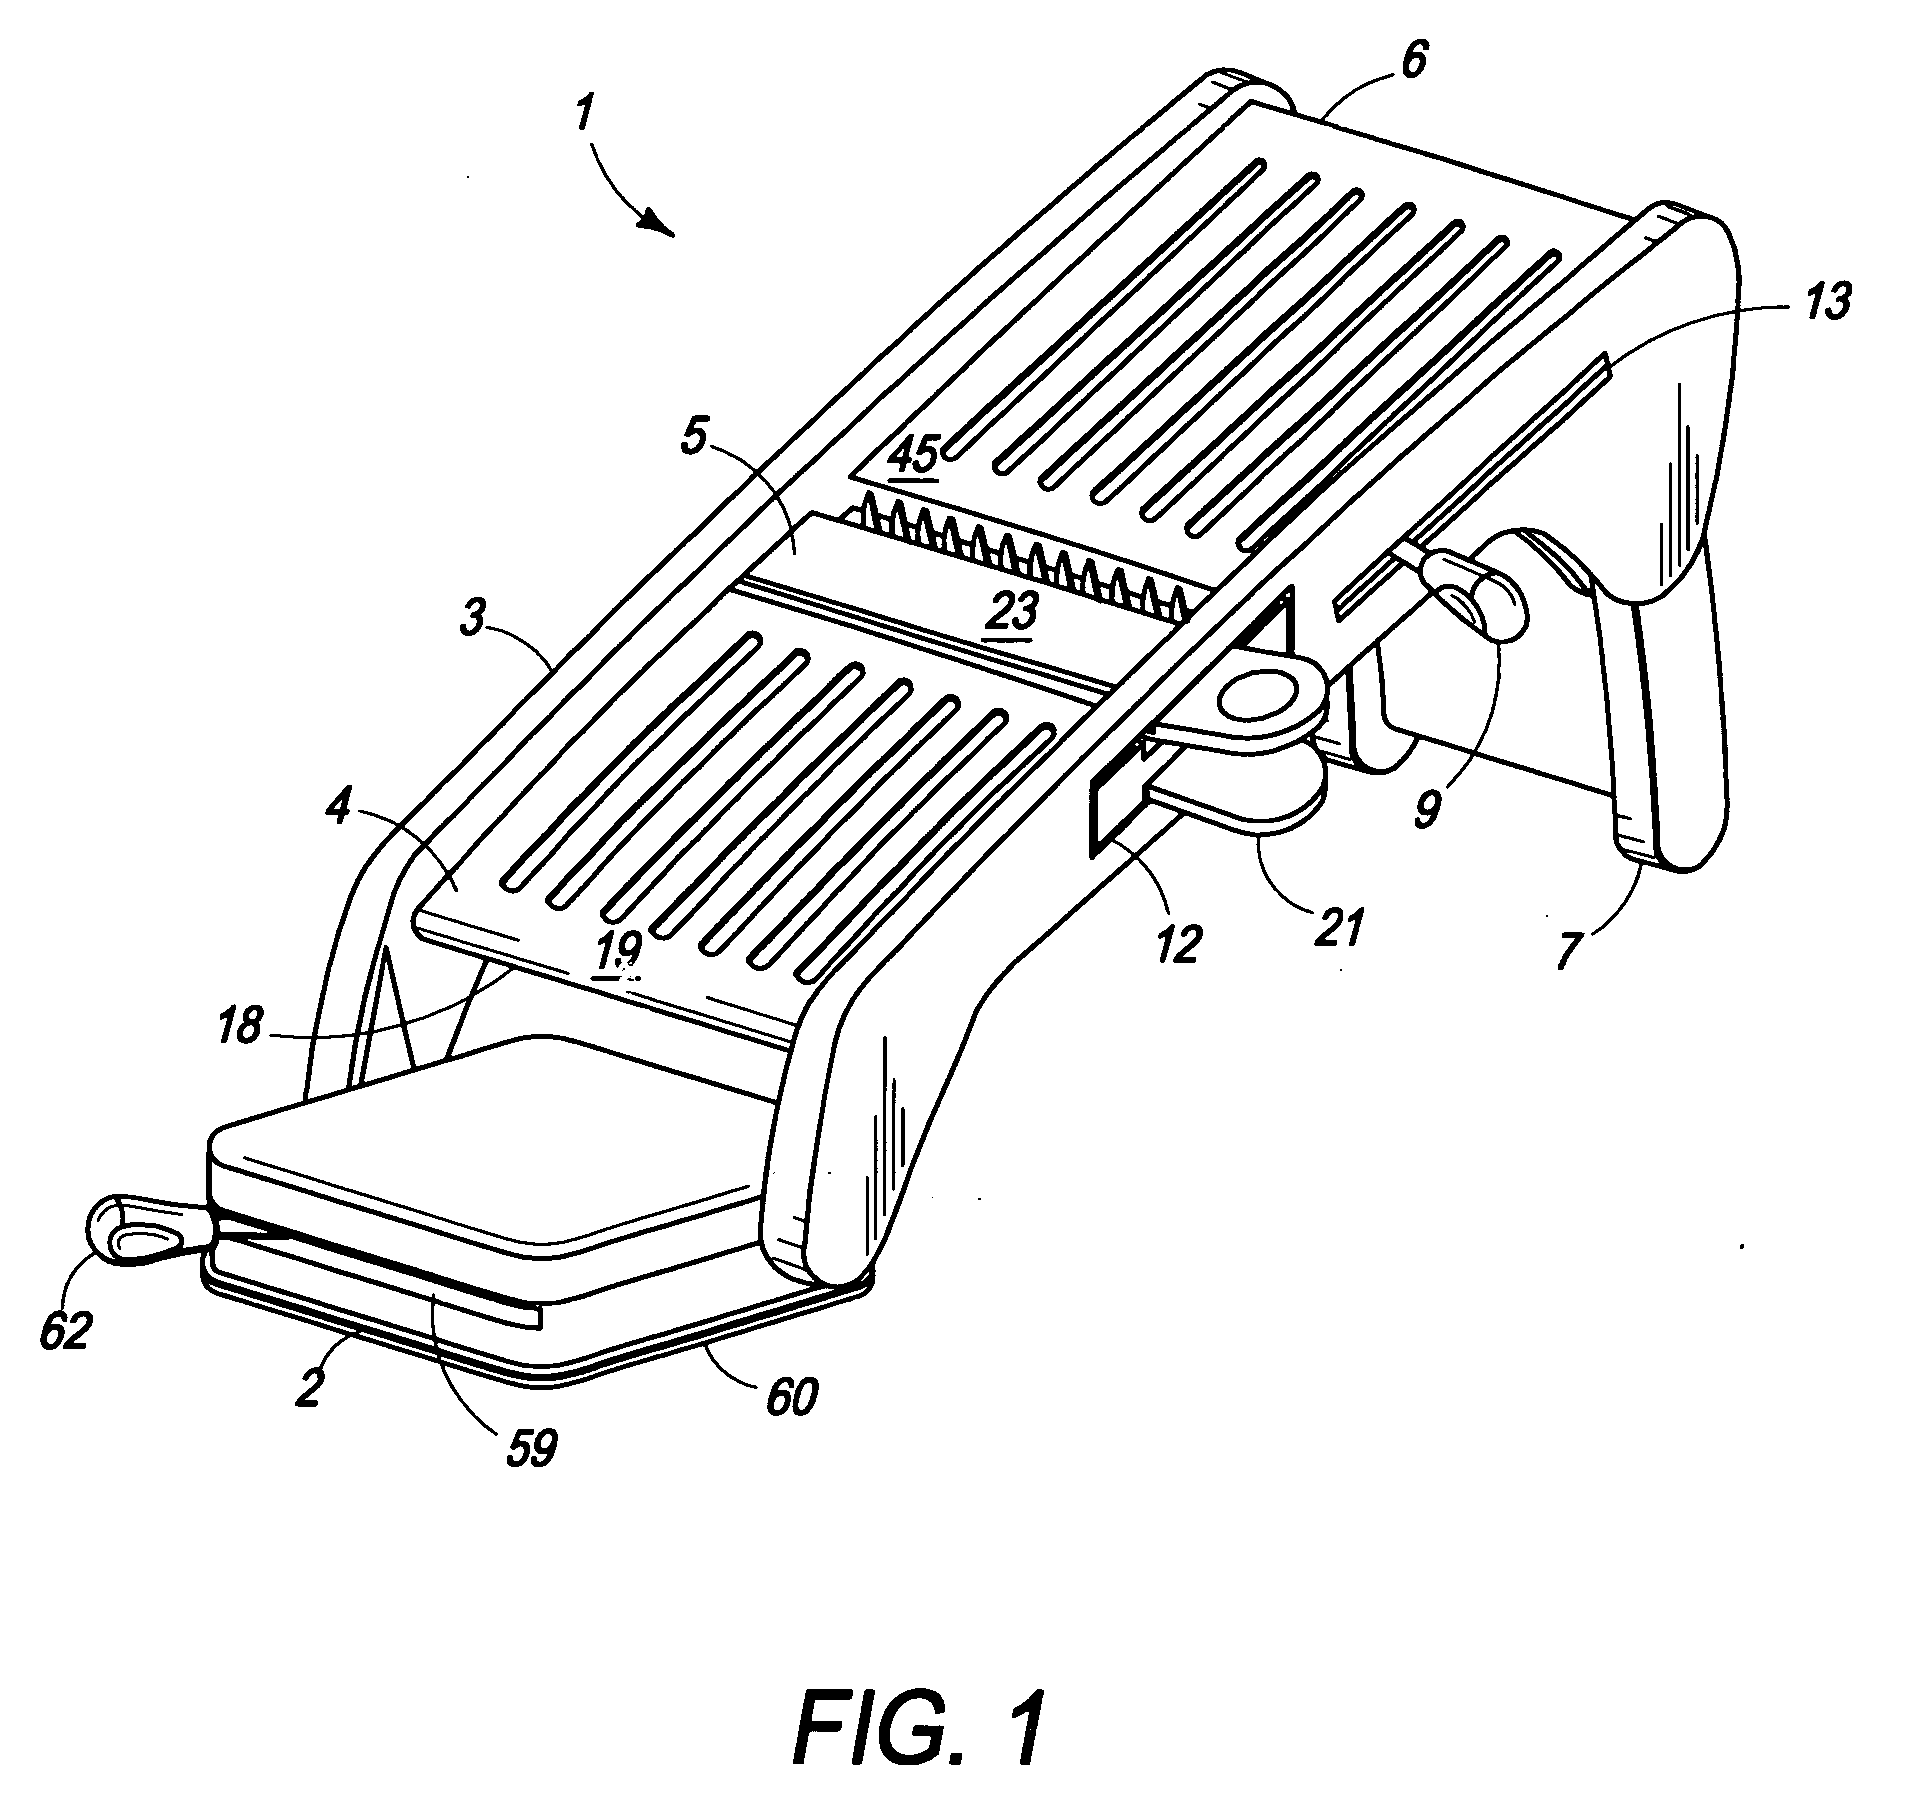 Food slicer with suction device and adjustable cutting surface